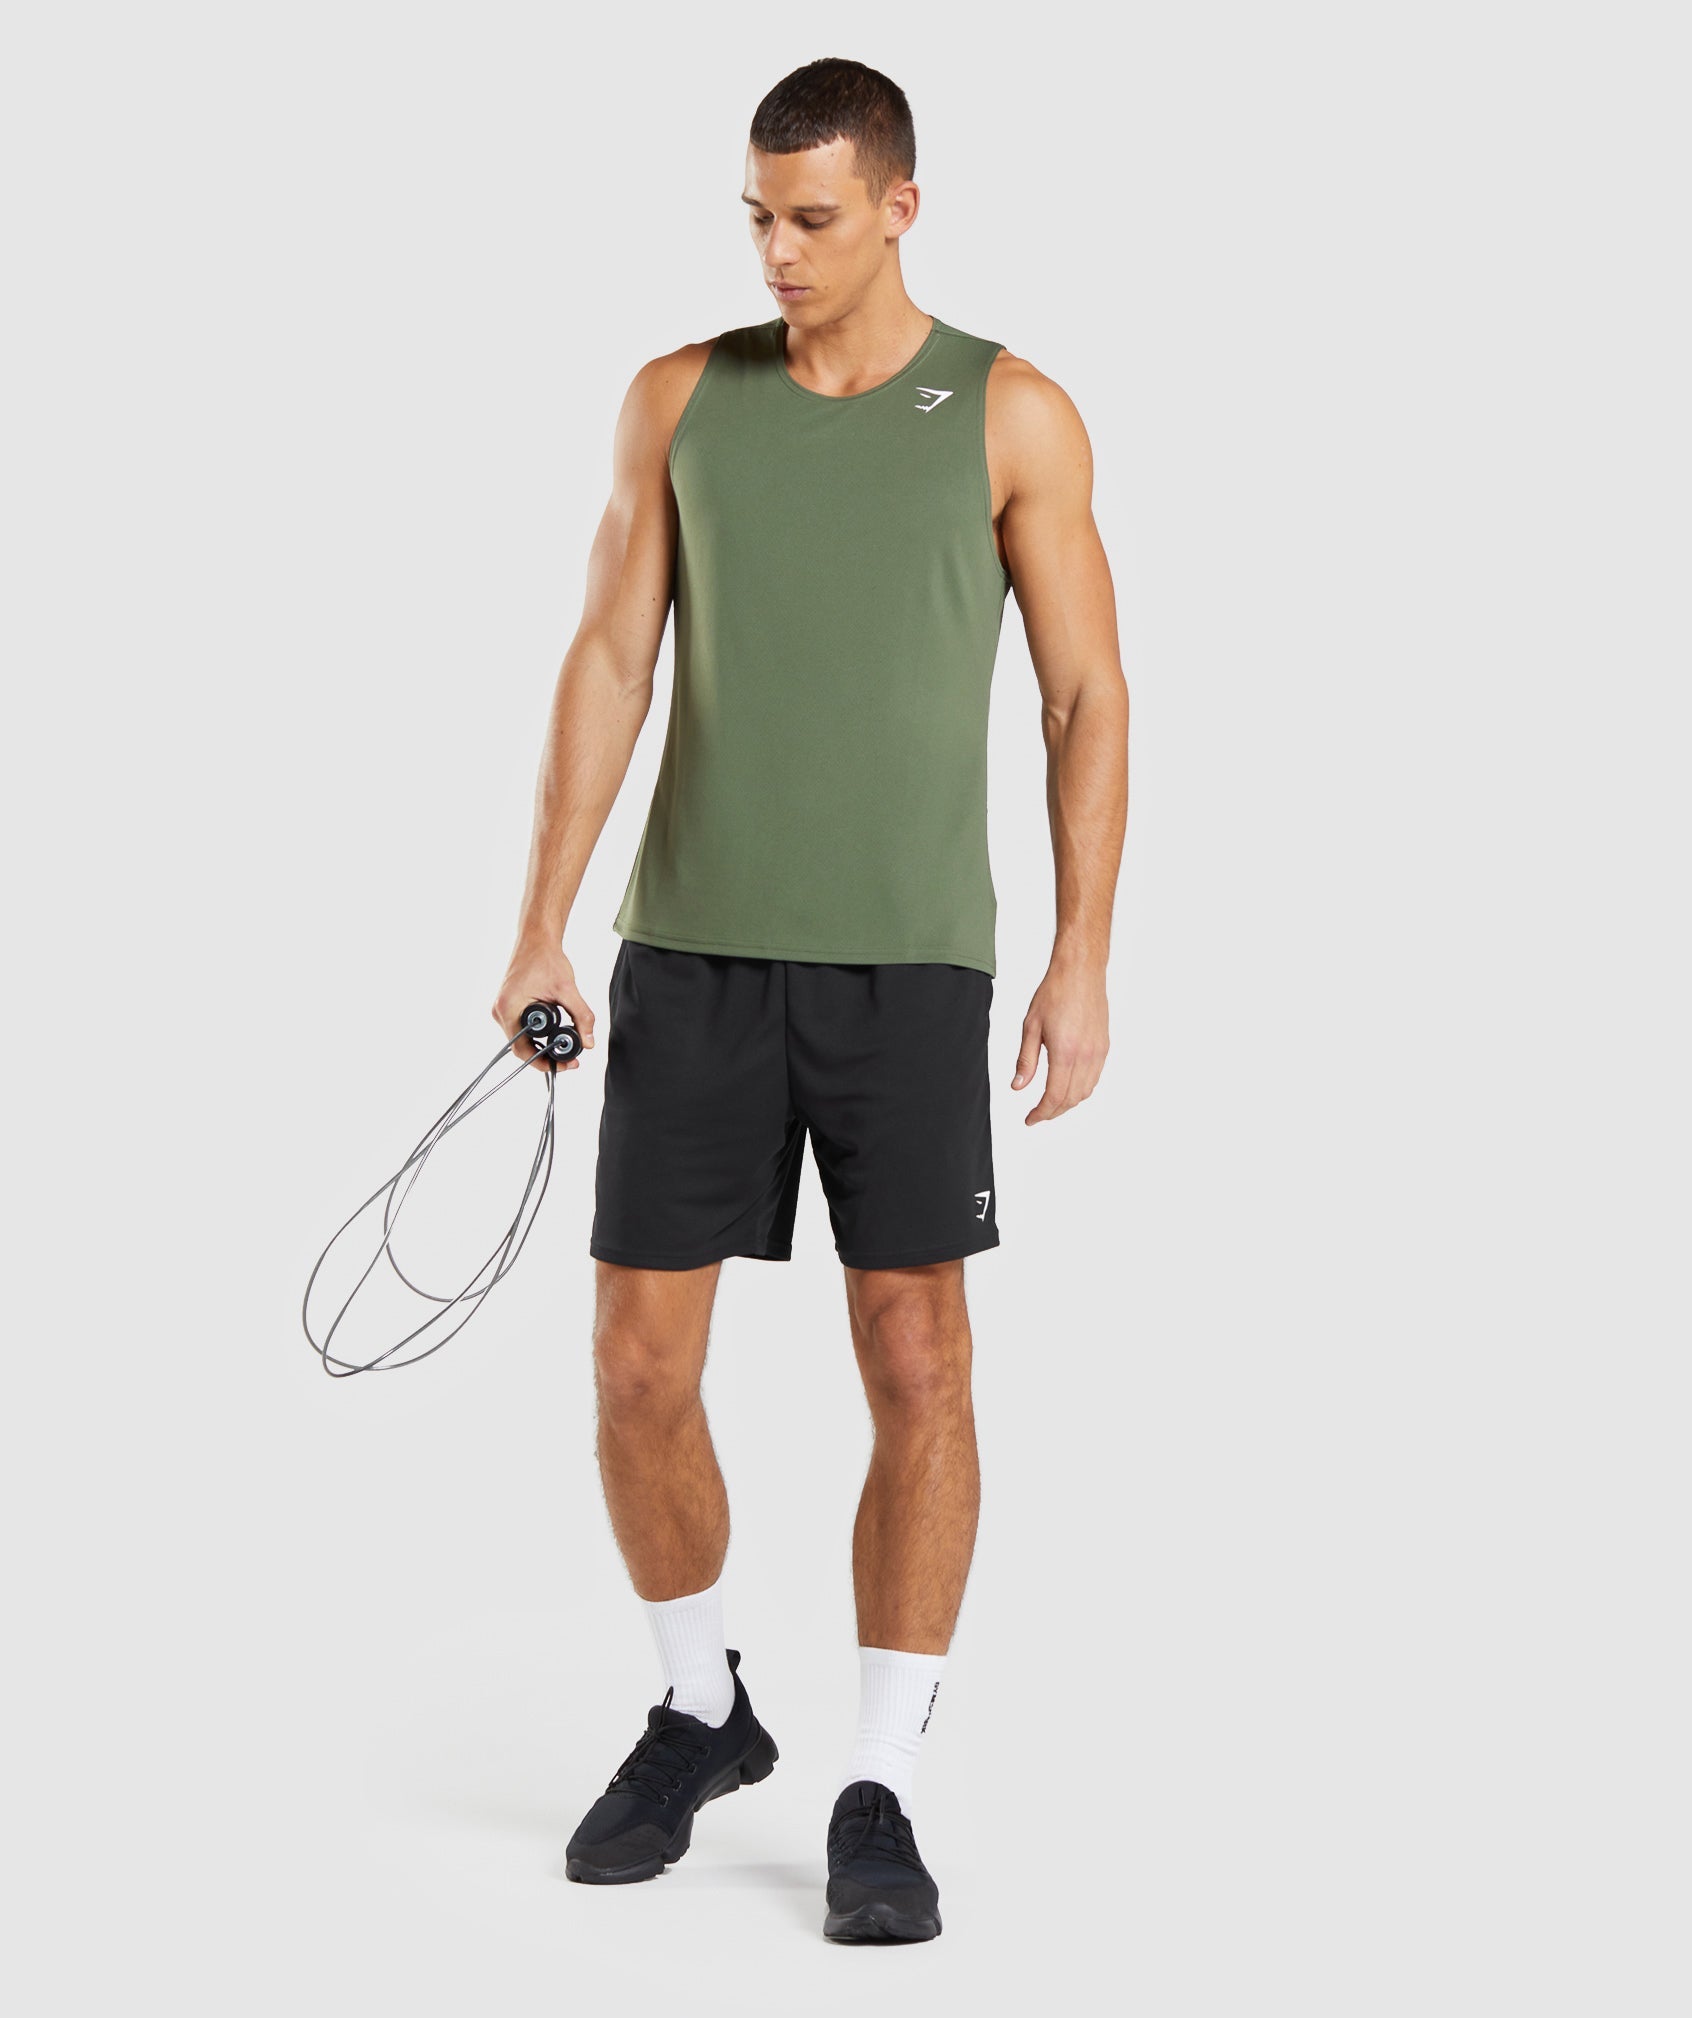 Arrival Tank in Core Olive